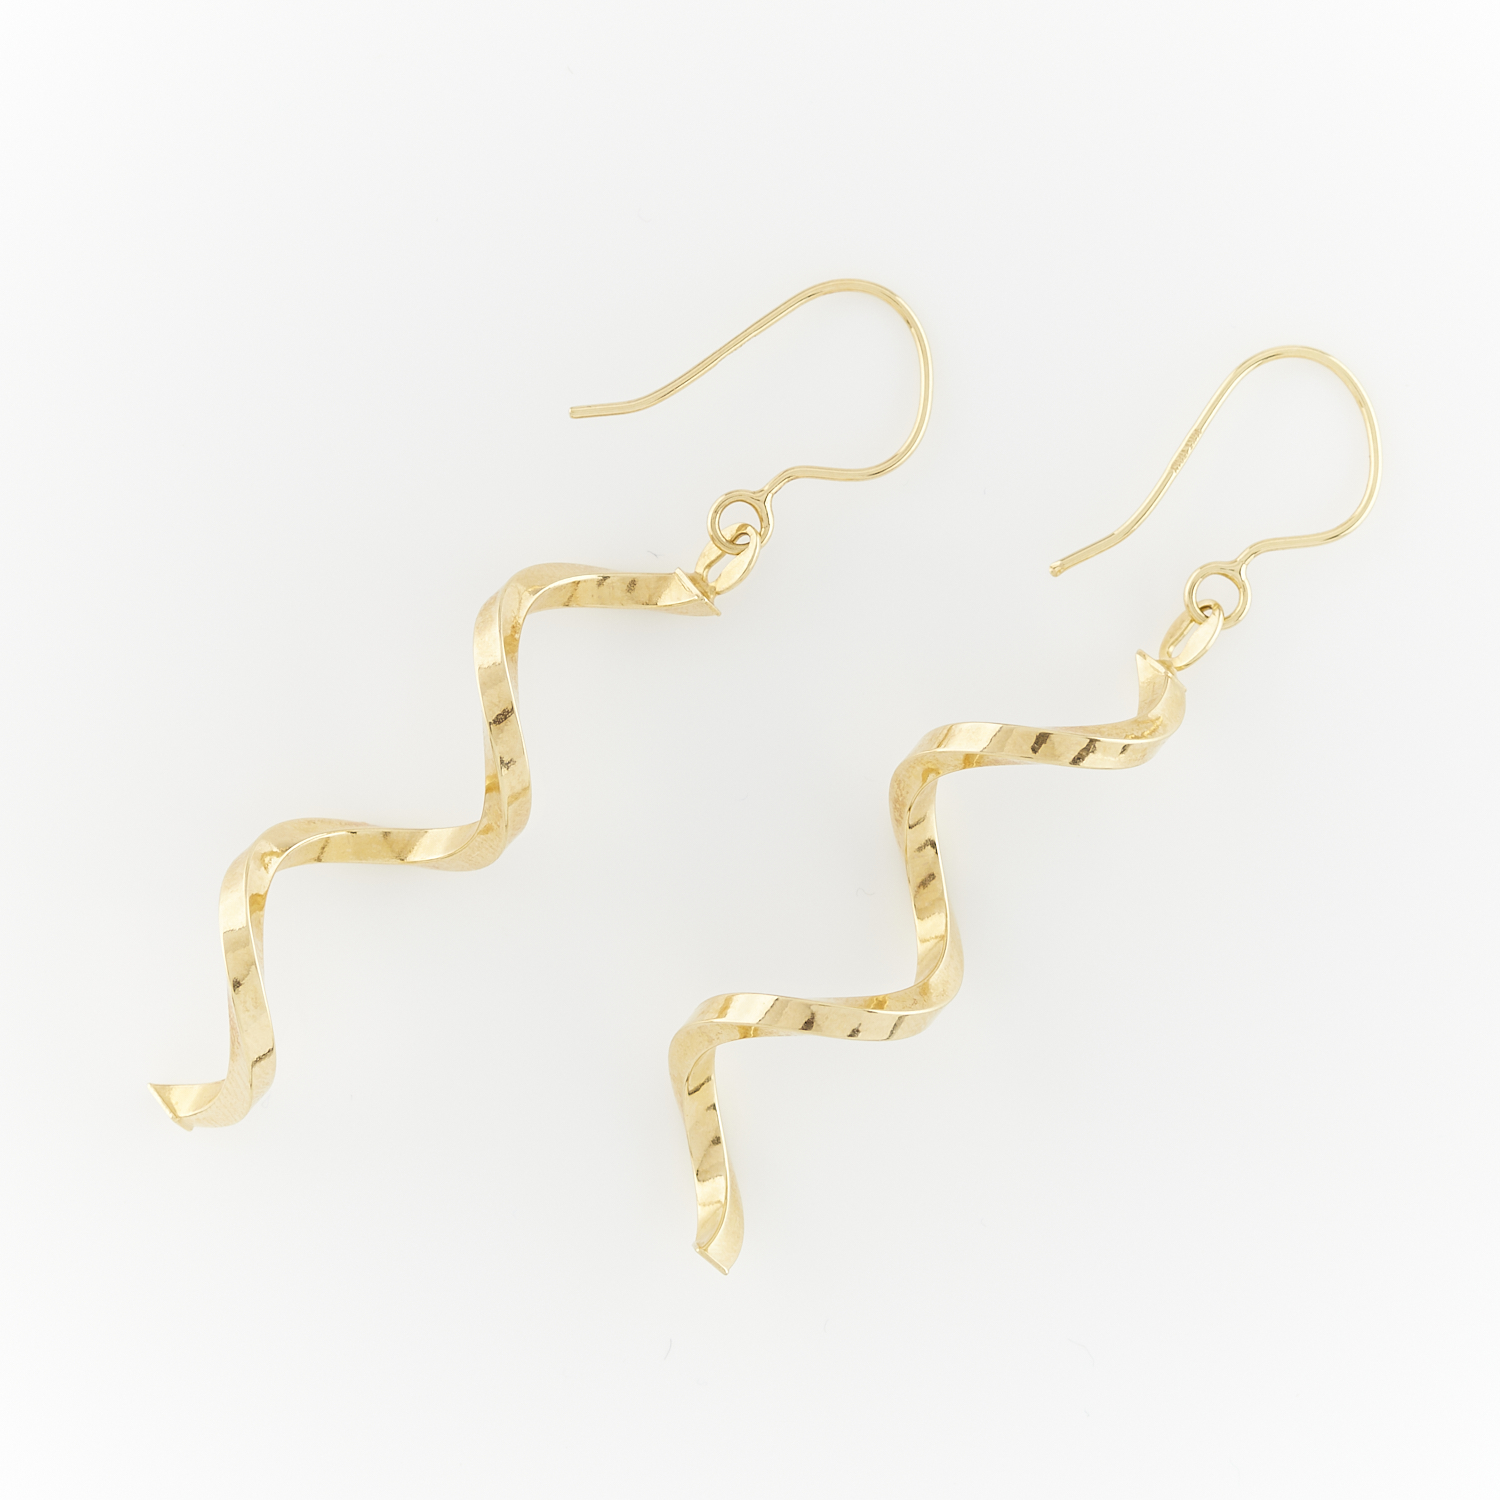 Italian 14k Yellow Gold Spiral Statement Earrings - Image 8 of 8